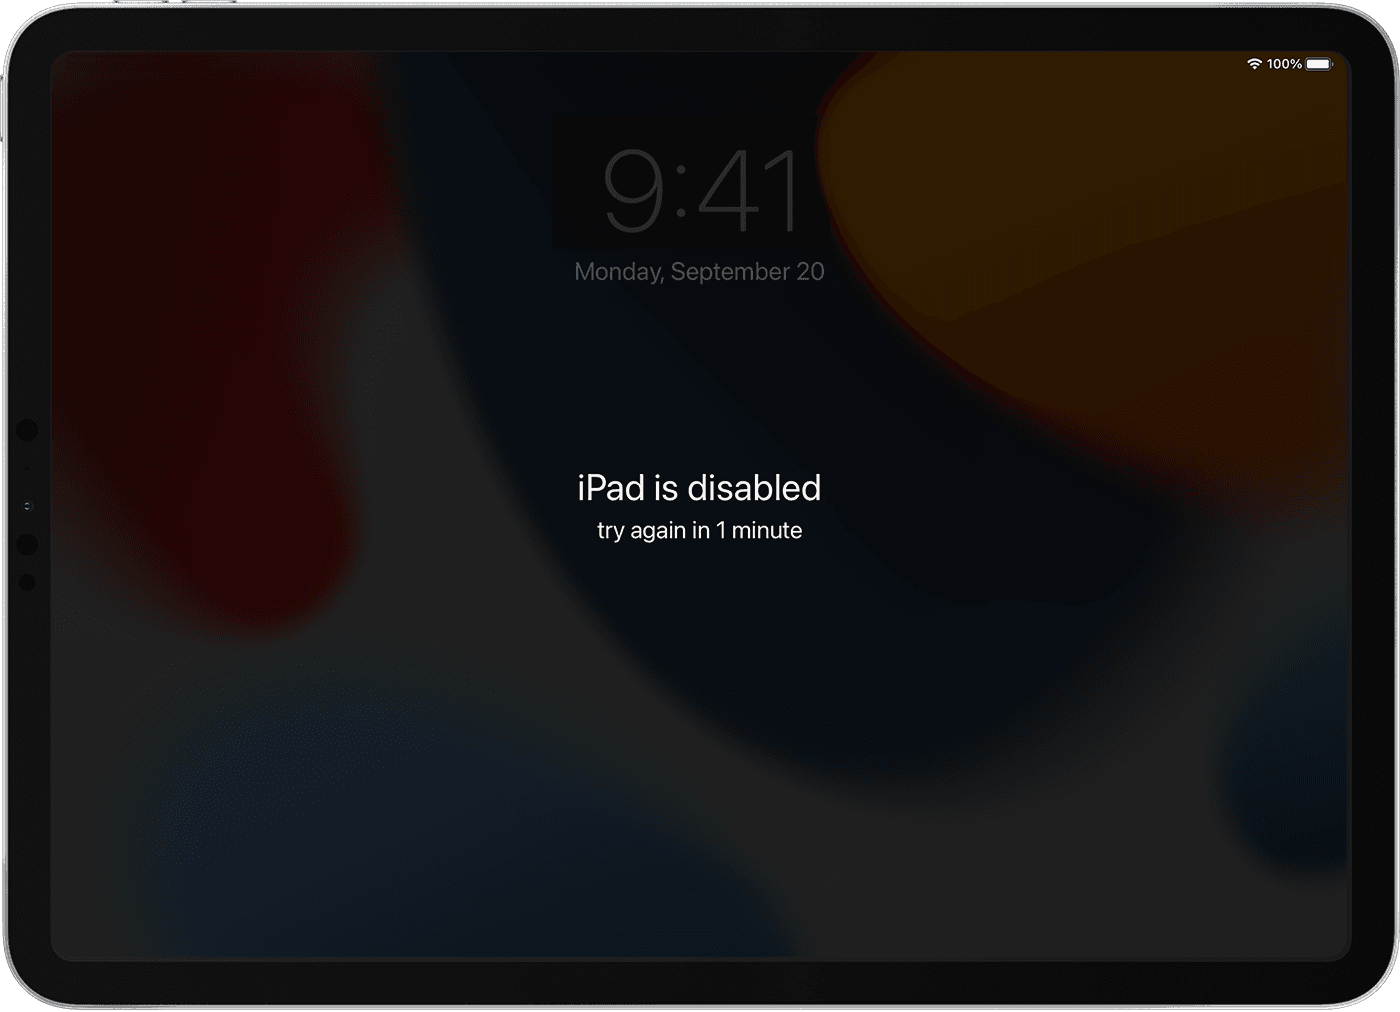 If you forgot the passcode on your iPad, or your iPad is disabled